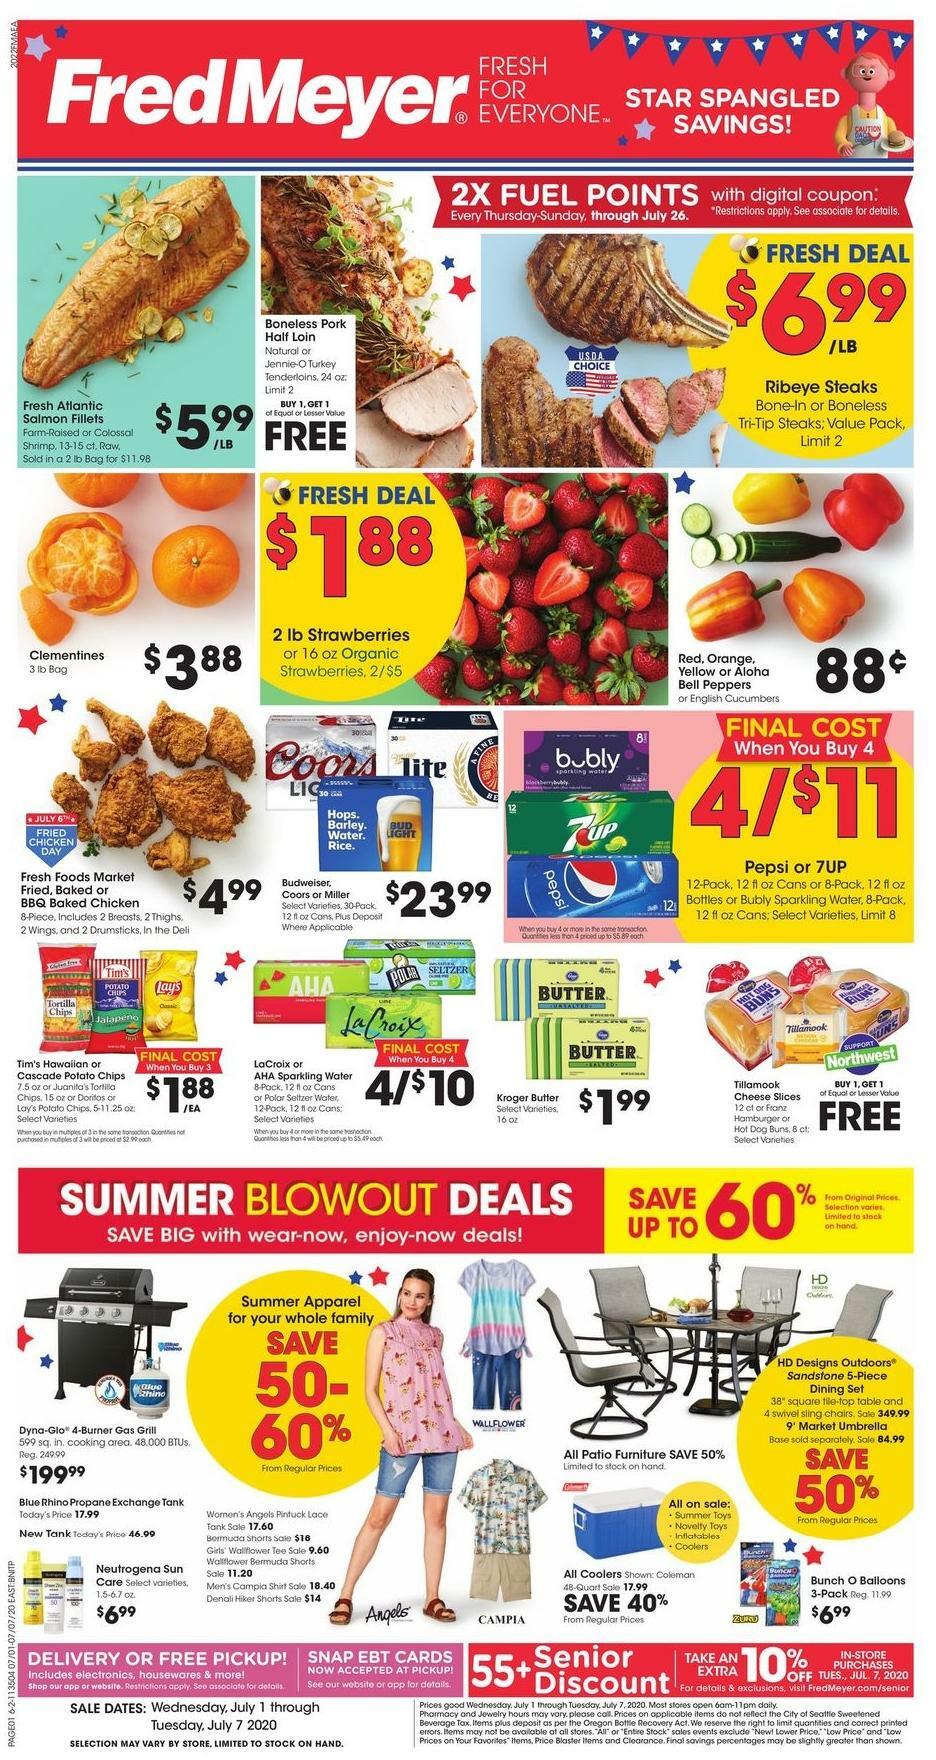 Fred Meyer Weekly Ad & Specials from July 1